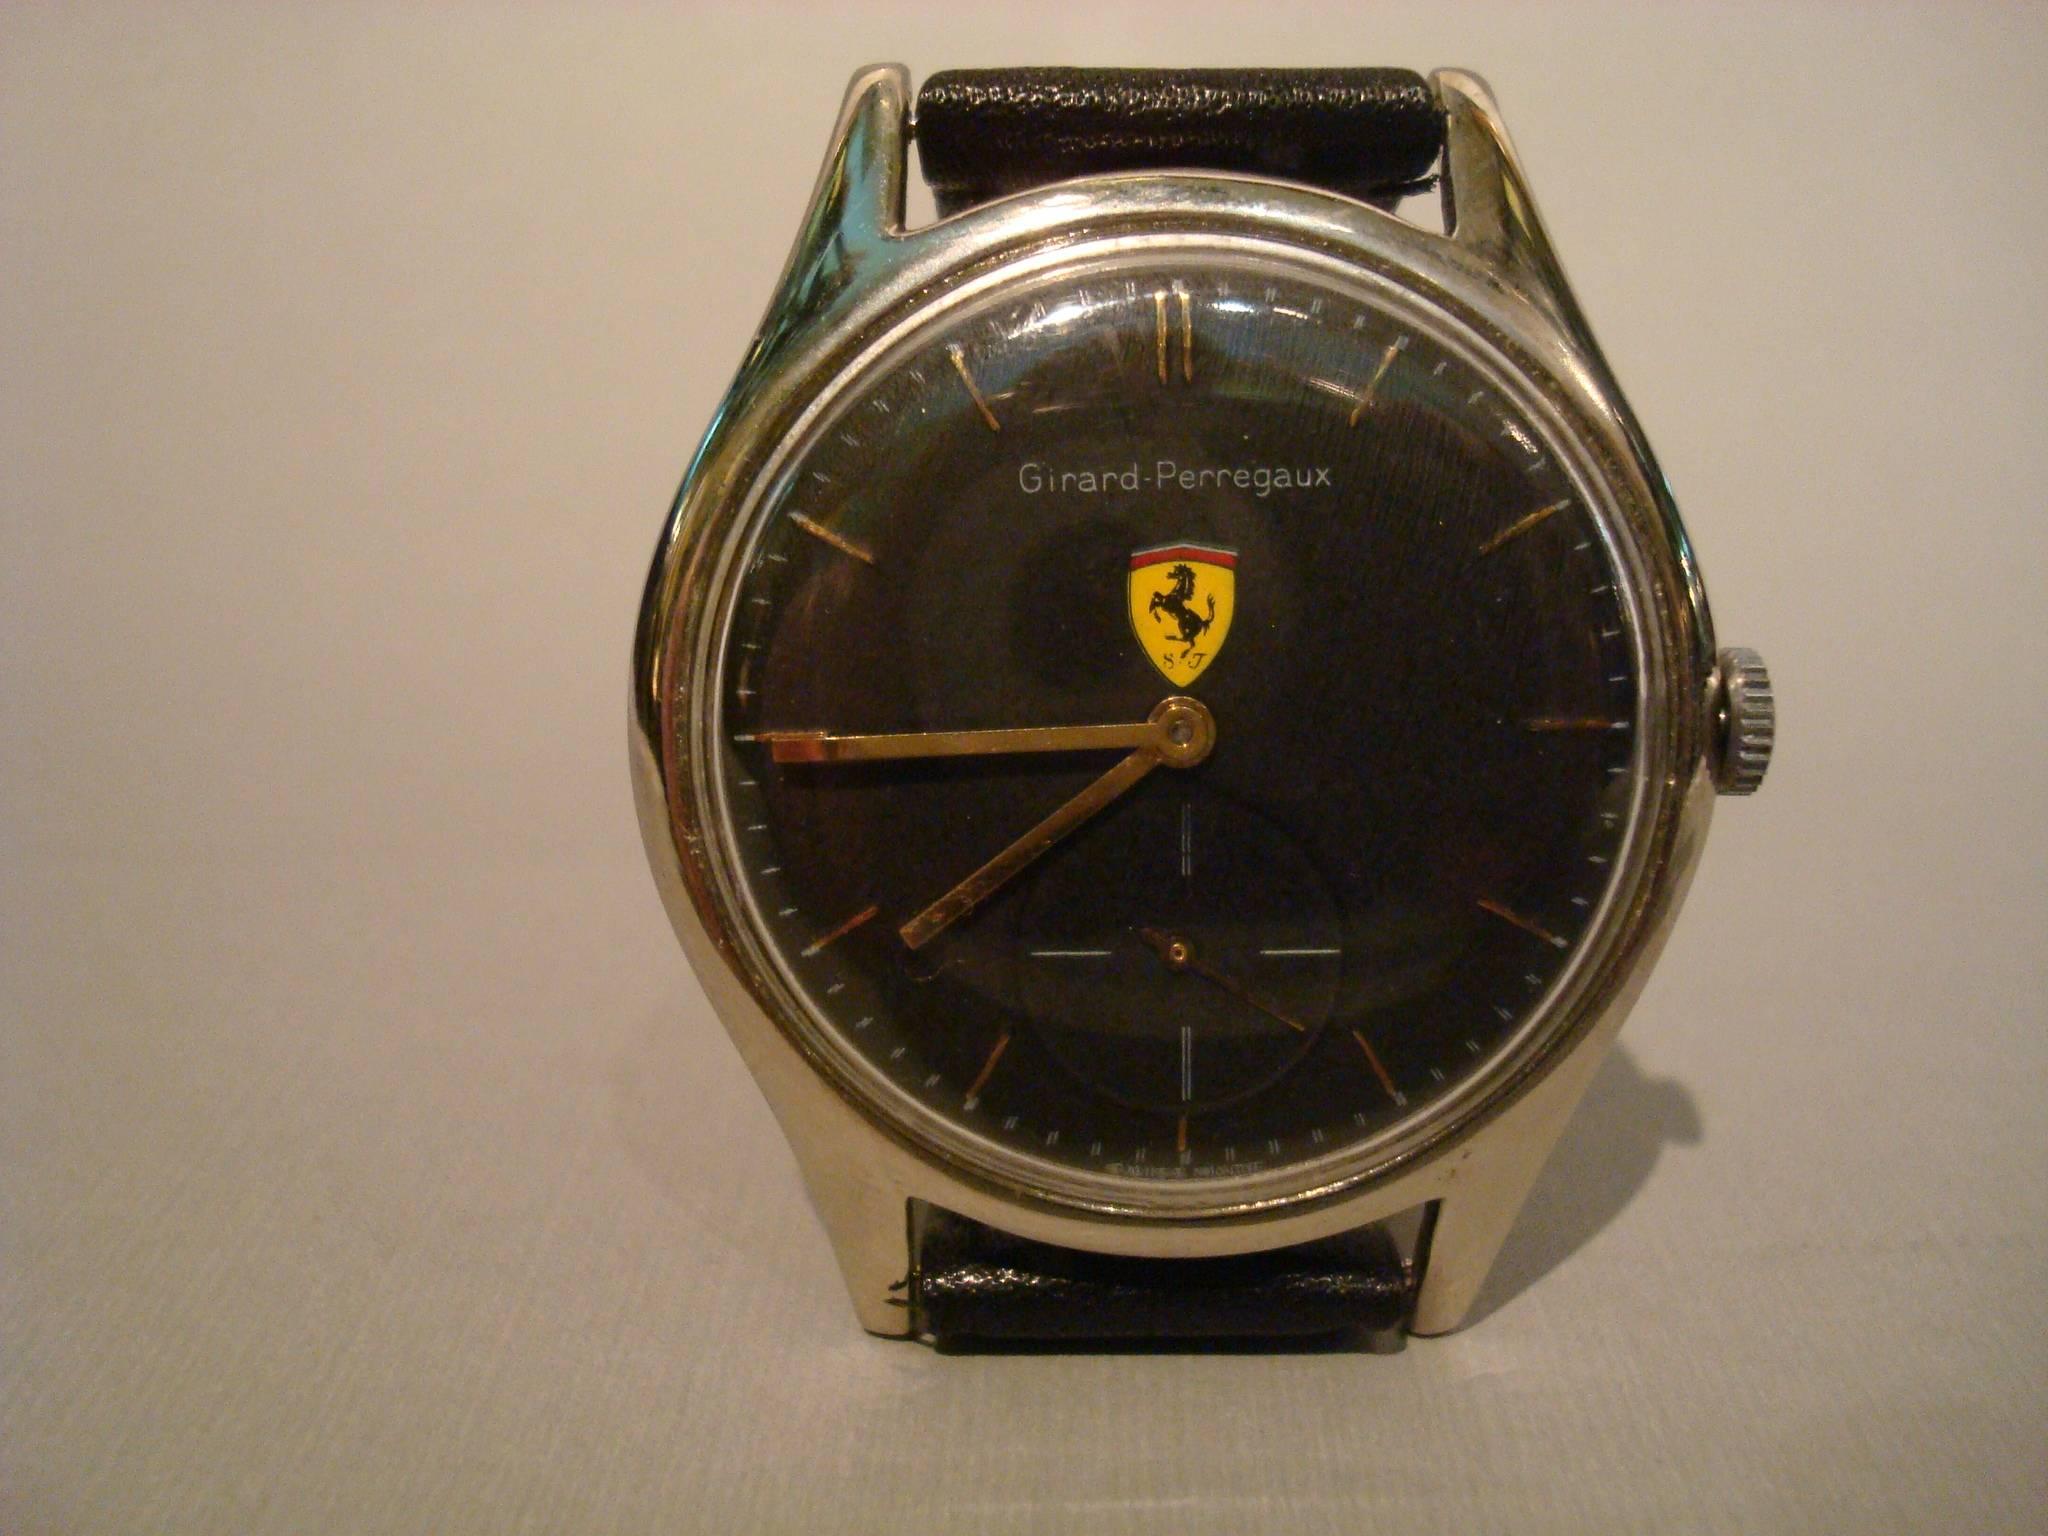 Rare 1960s Girard Perregaux Ferrari watch, featuring a black face, with yellow logo, silver case and presented on an aftermarket leather band. This is a lovely original Girard Perregaux watch and is stamped on the reverse side of the case with both